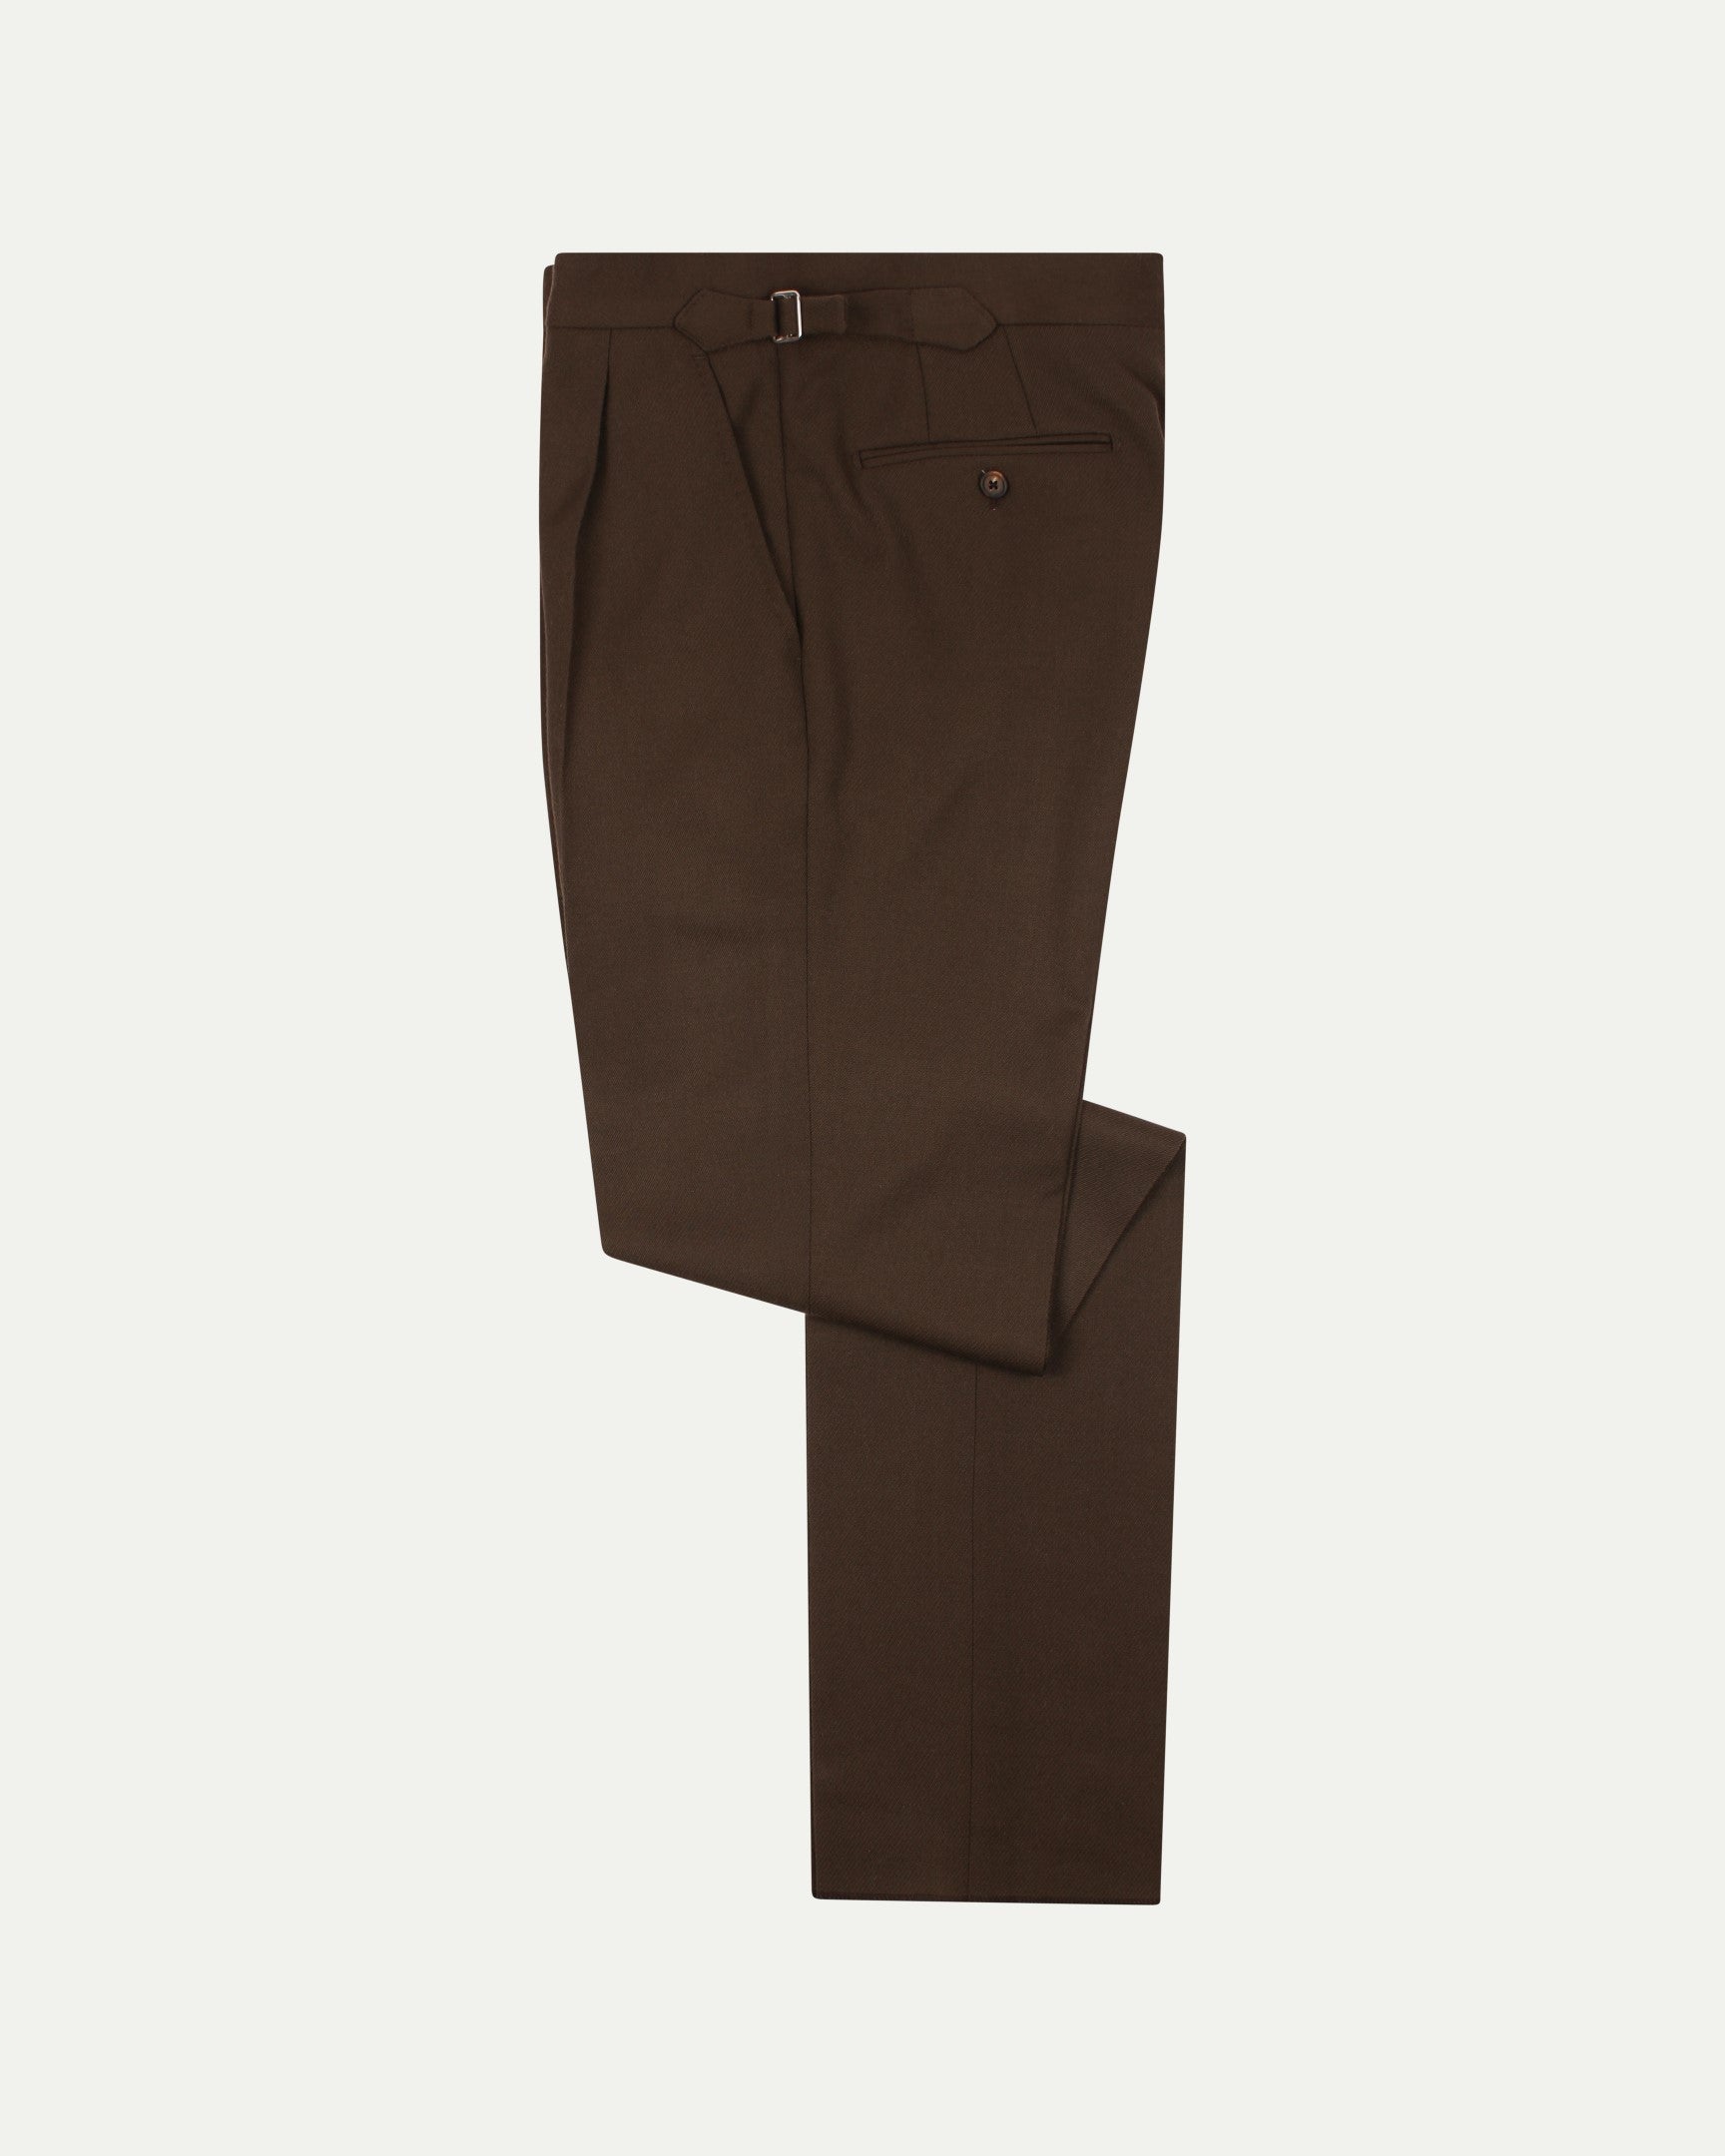 Made-To-Order Trousers in Brown Cavalry Twill